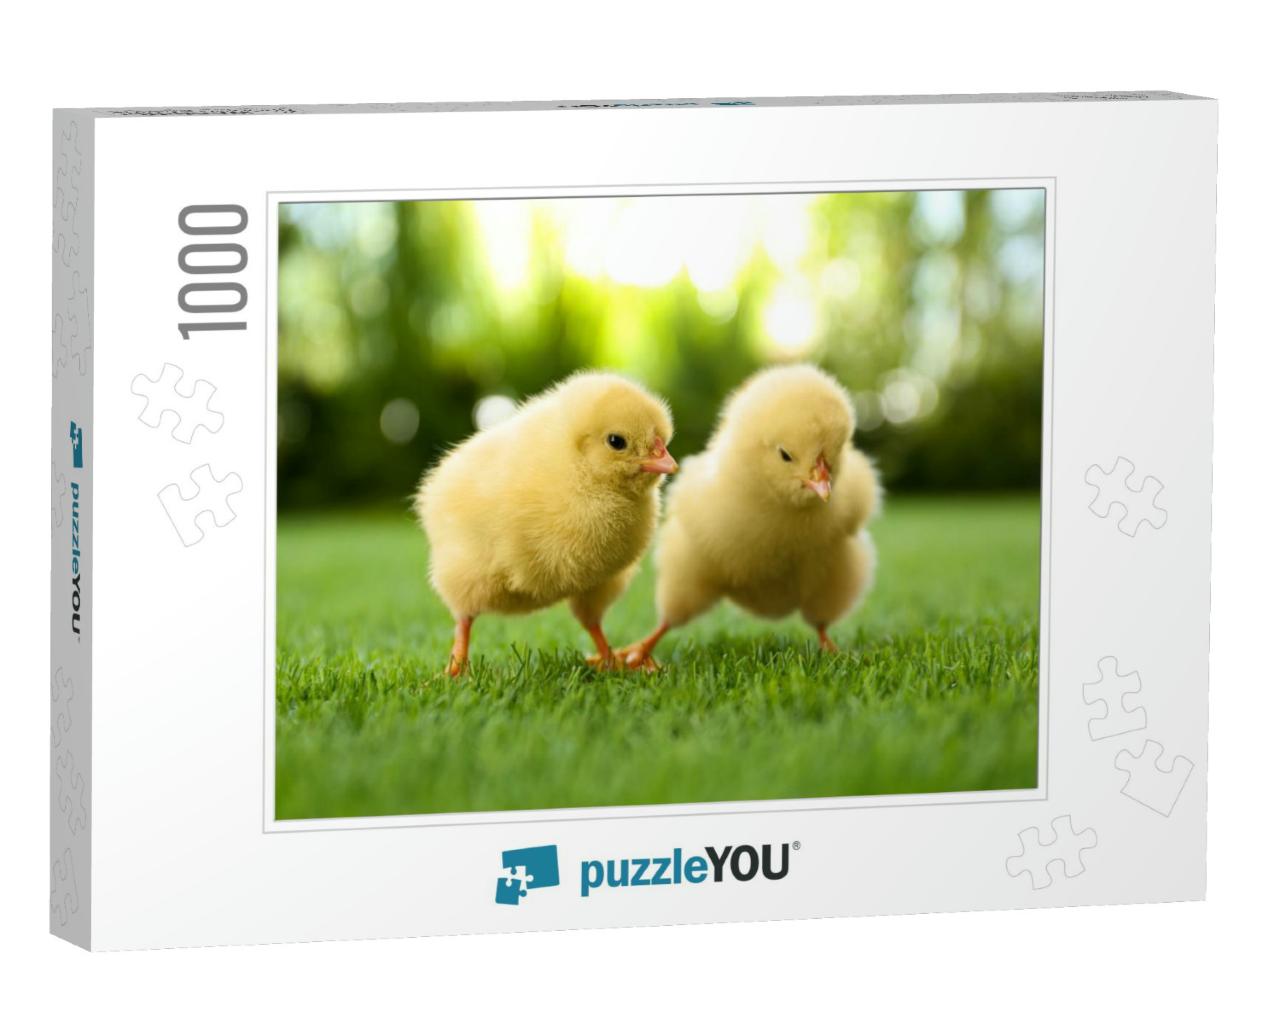 Cute Fluffy Baby Chickens Together on Green Grass Outdoor... Jigsaw Puzzle with 1000 pieces